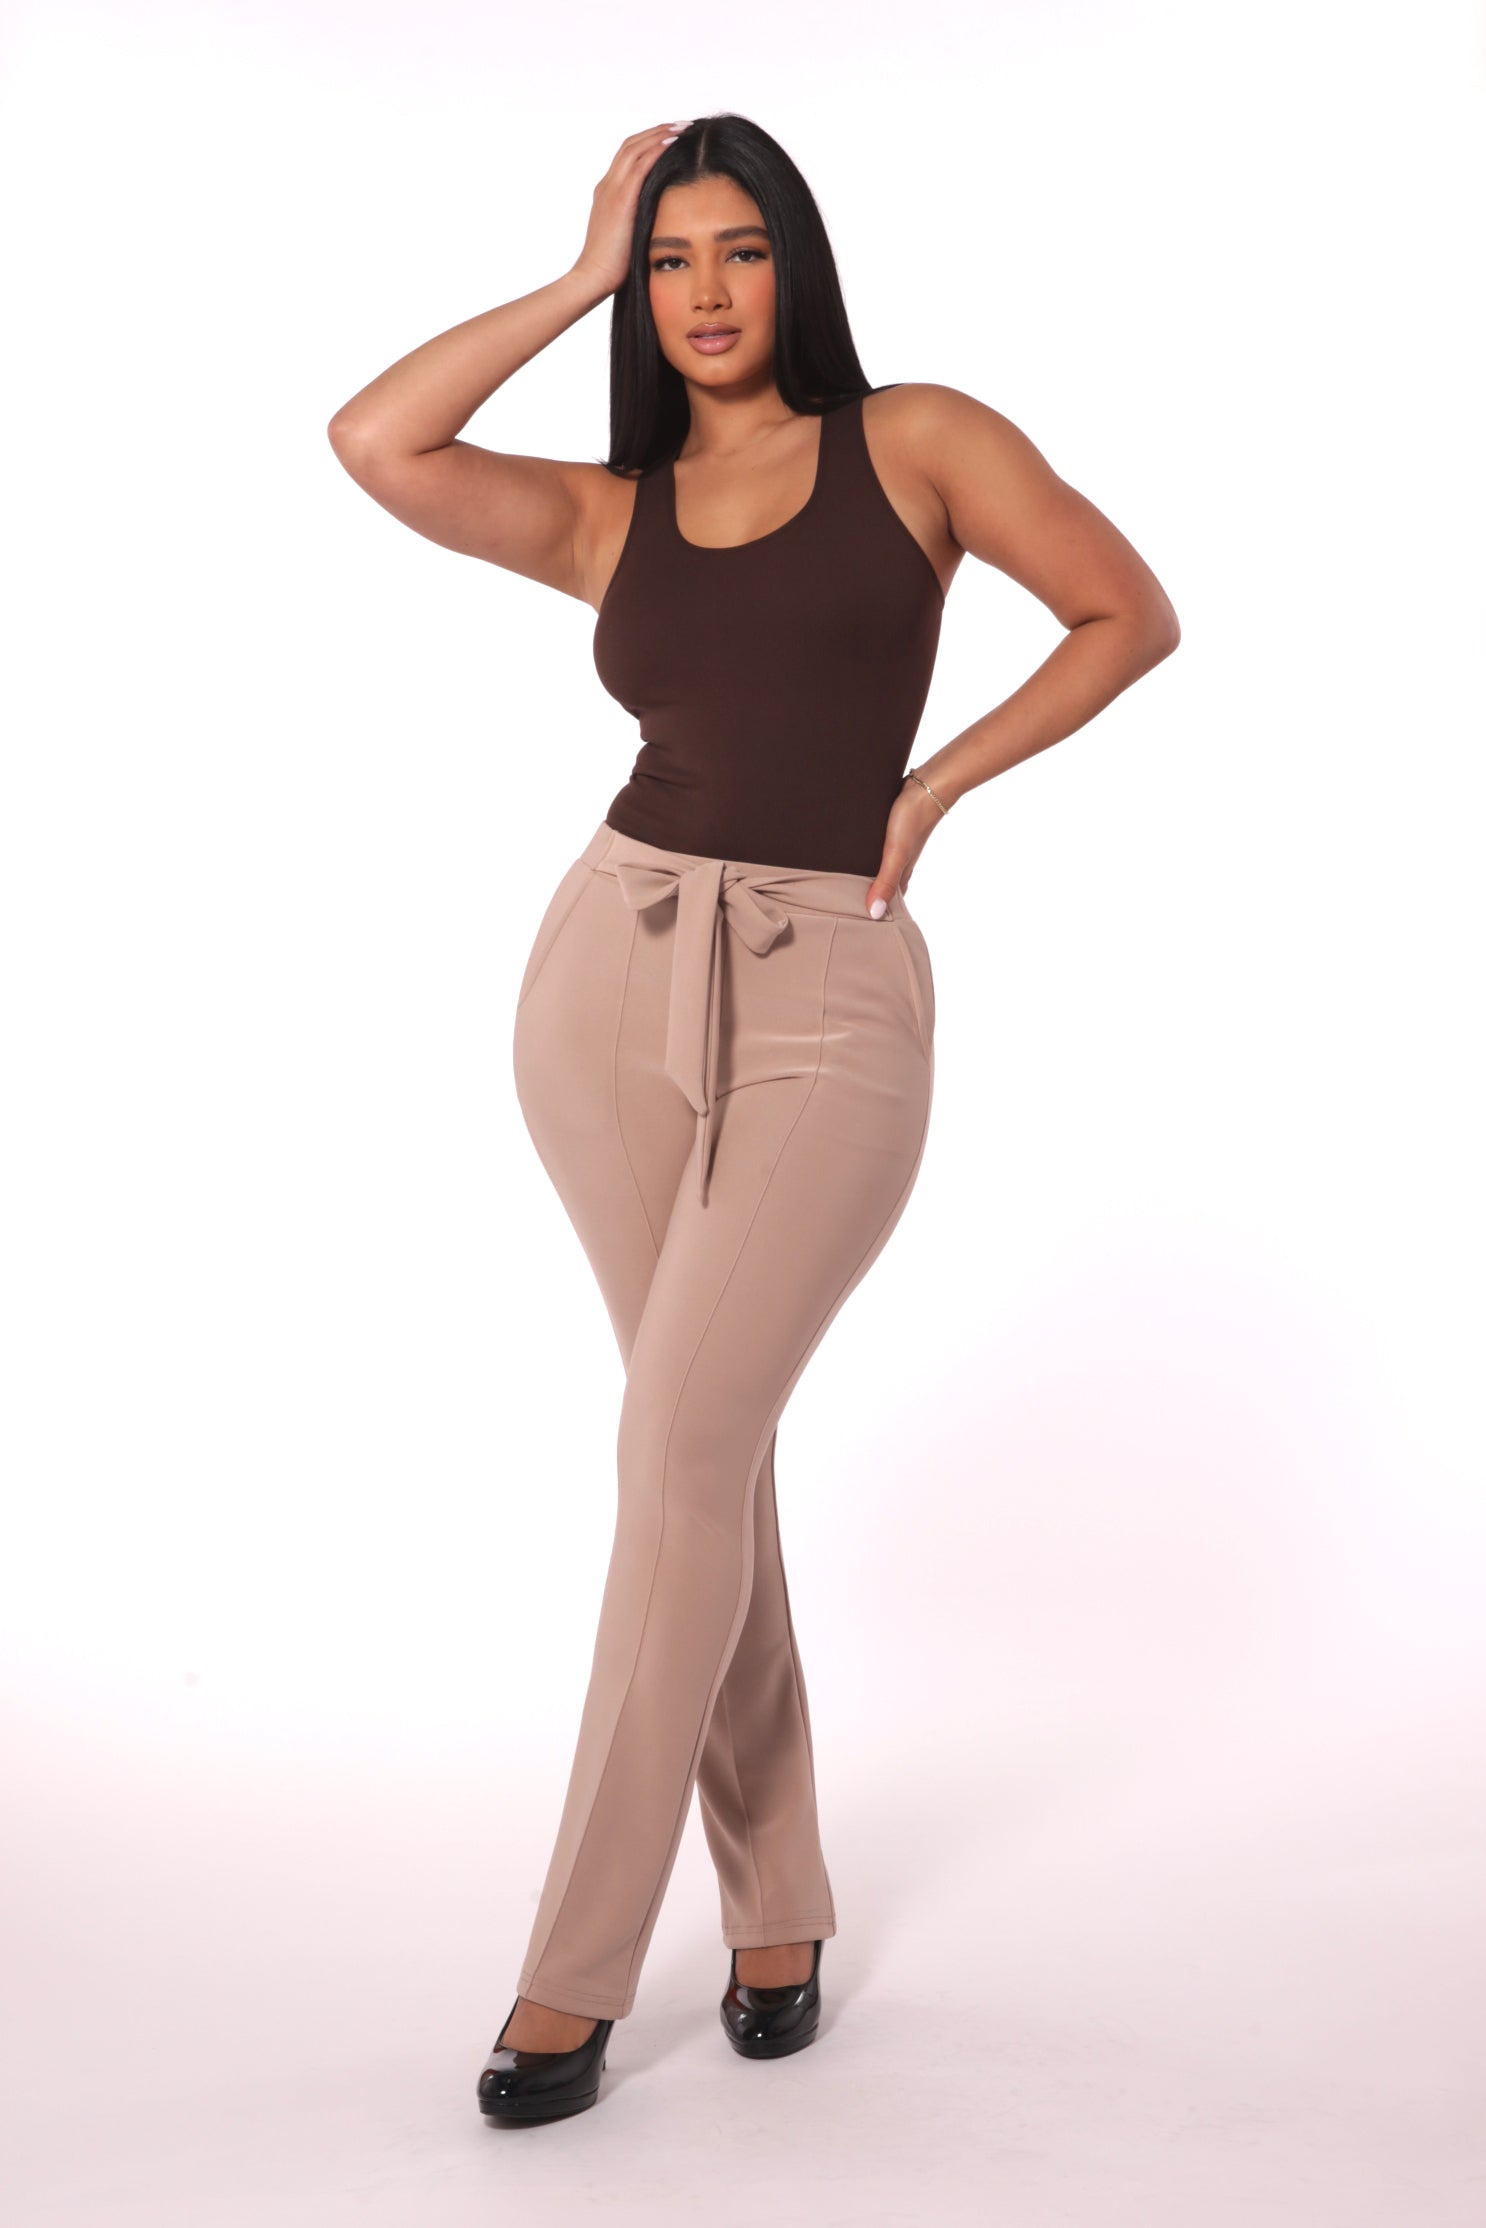 Wholesale Womens High Waist Flare Pants With Front Seam Detail And Waist Tie - Latte - S&G Apparel